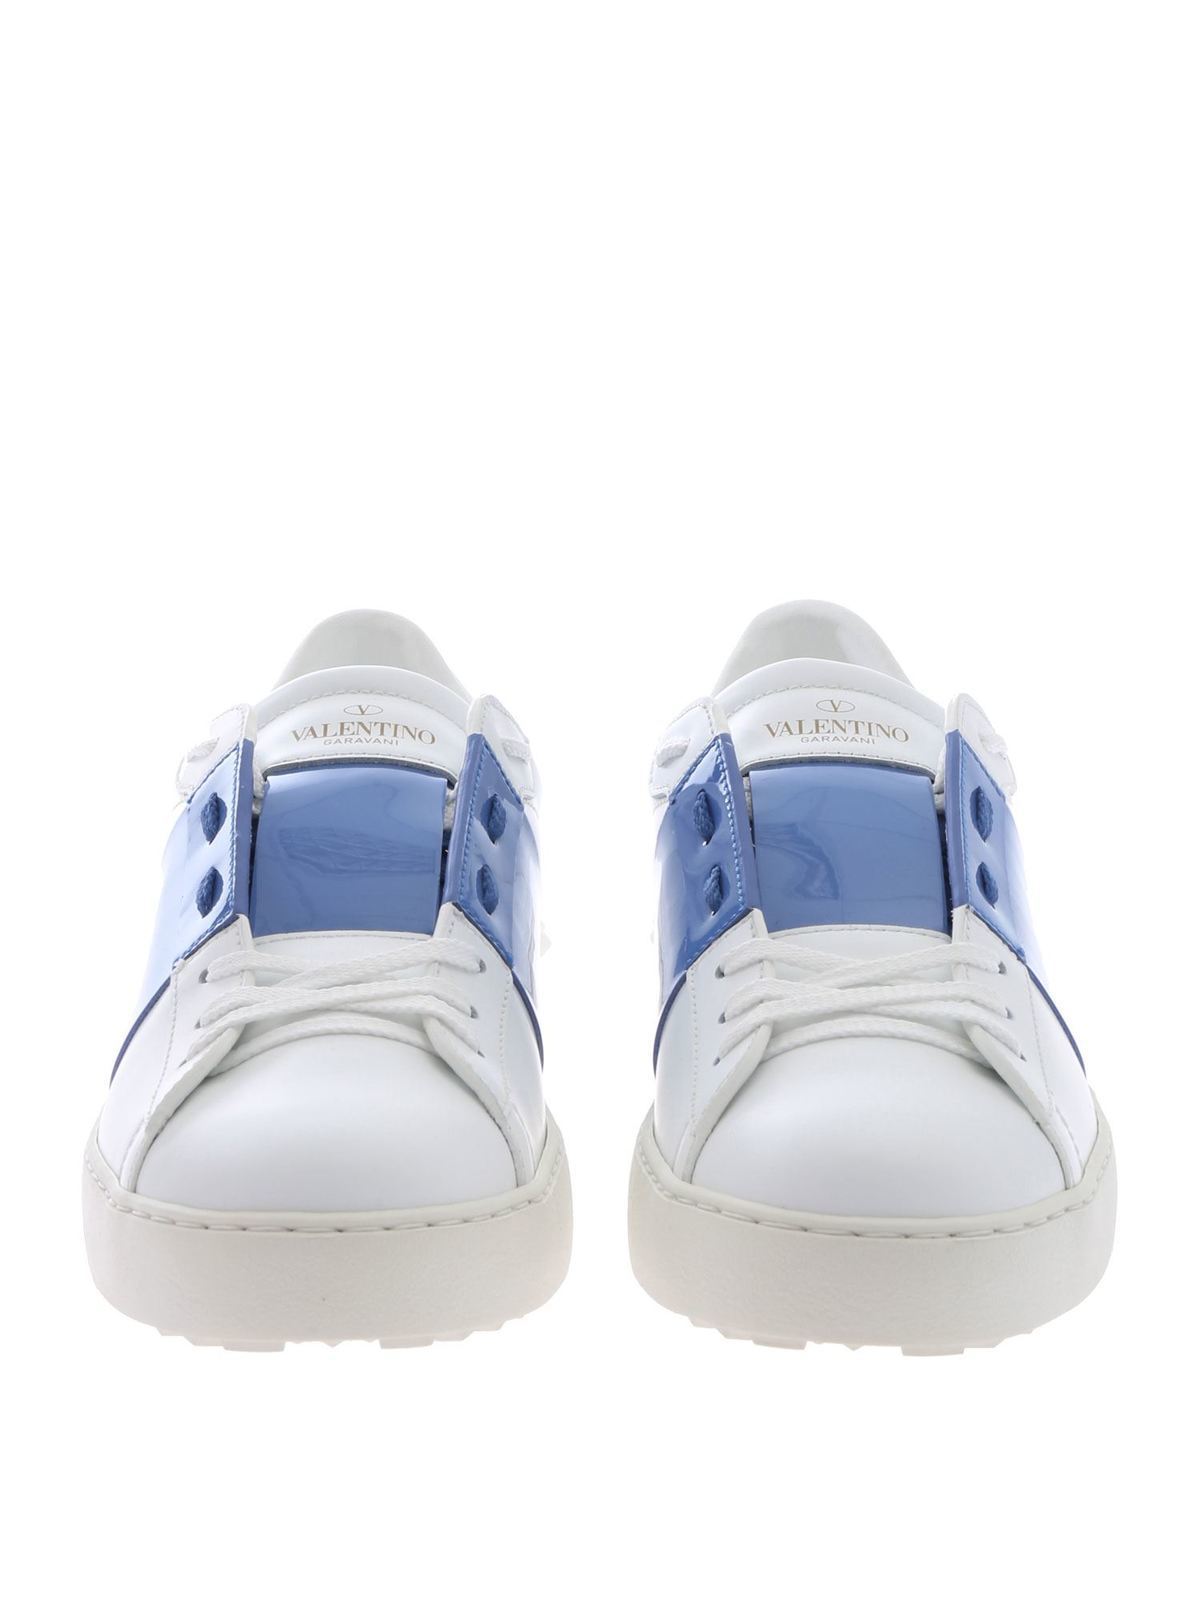 baby blue valentino shoes